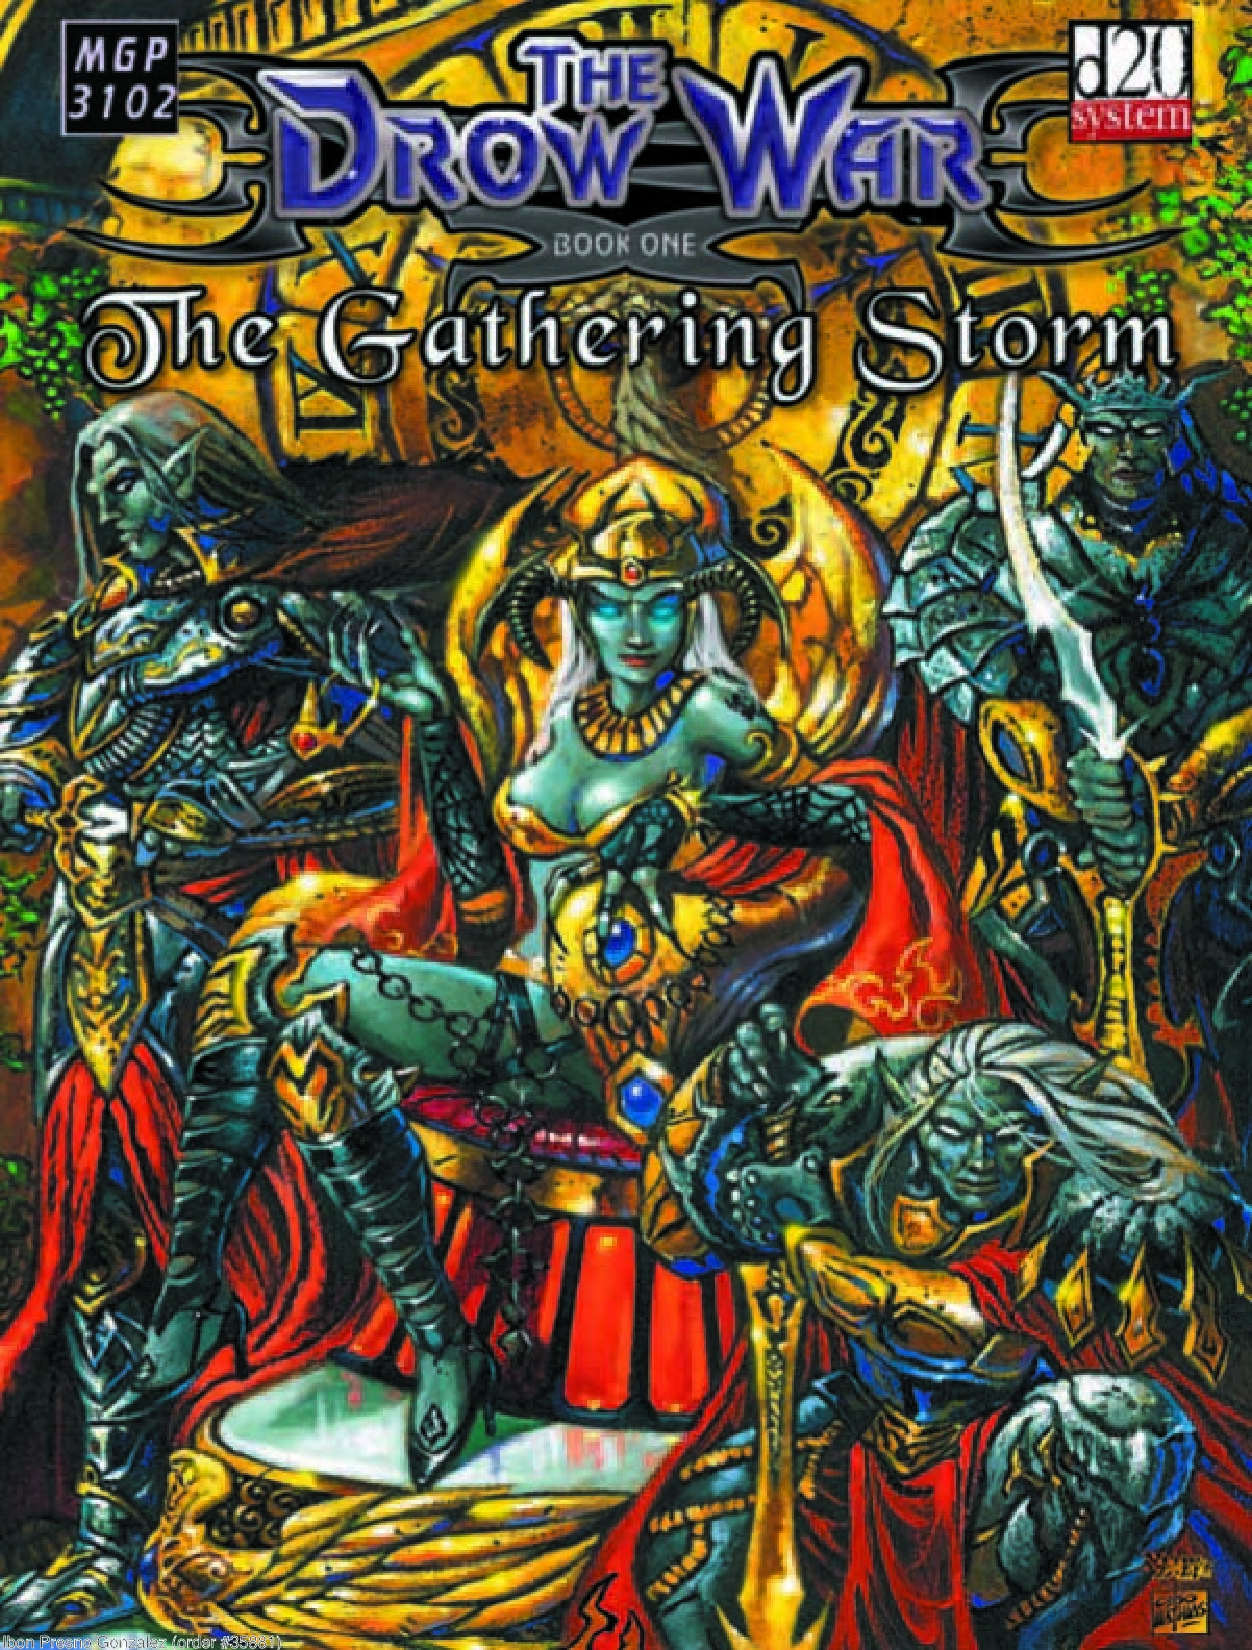 The Drow War Book One. The Gathering Storm